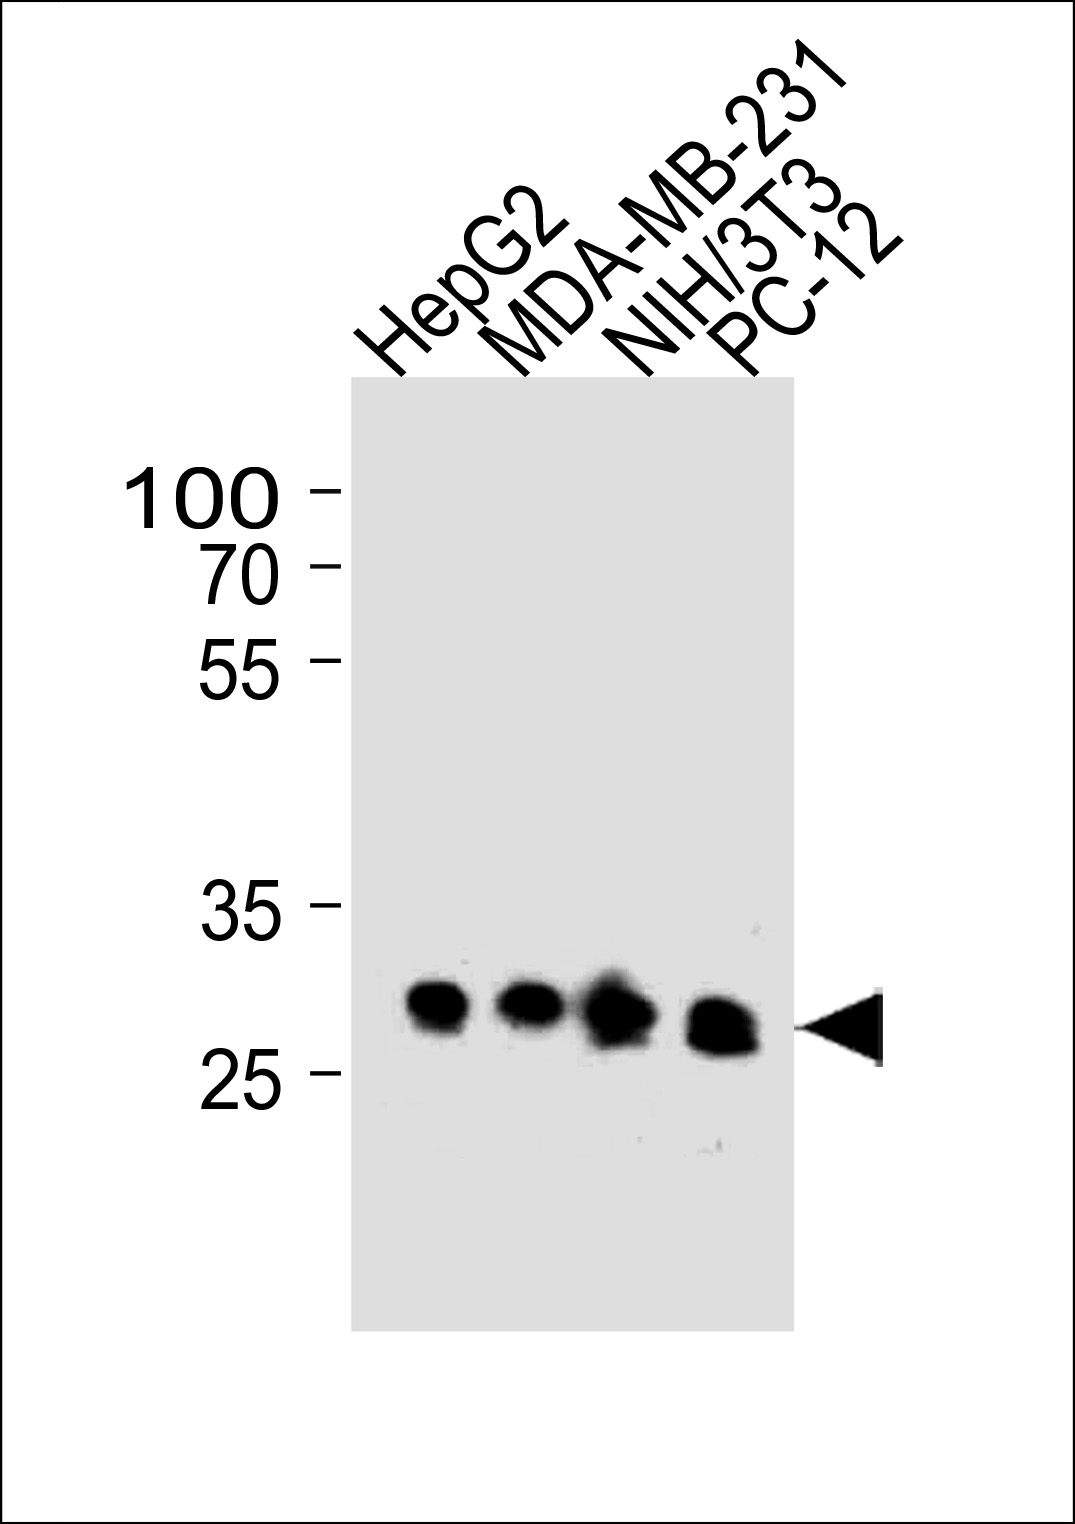 BCL2L1 Antibody(Cat. #AM2211b) western blot analysis in HepG2,MDA-MB-231,mouse NIH/3T3 and rat PC-12 cell line lysates (35?g/lane).This demonstrates the BCL2L1 antibody detected the BCL2L1 protein (arrow).